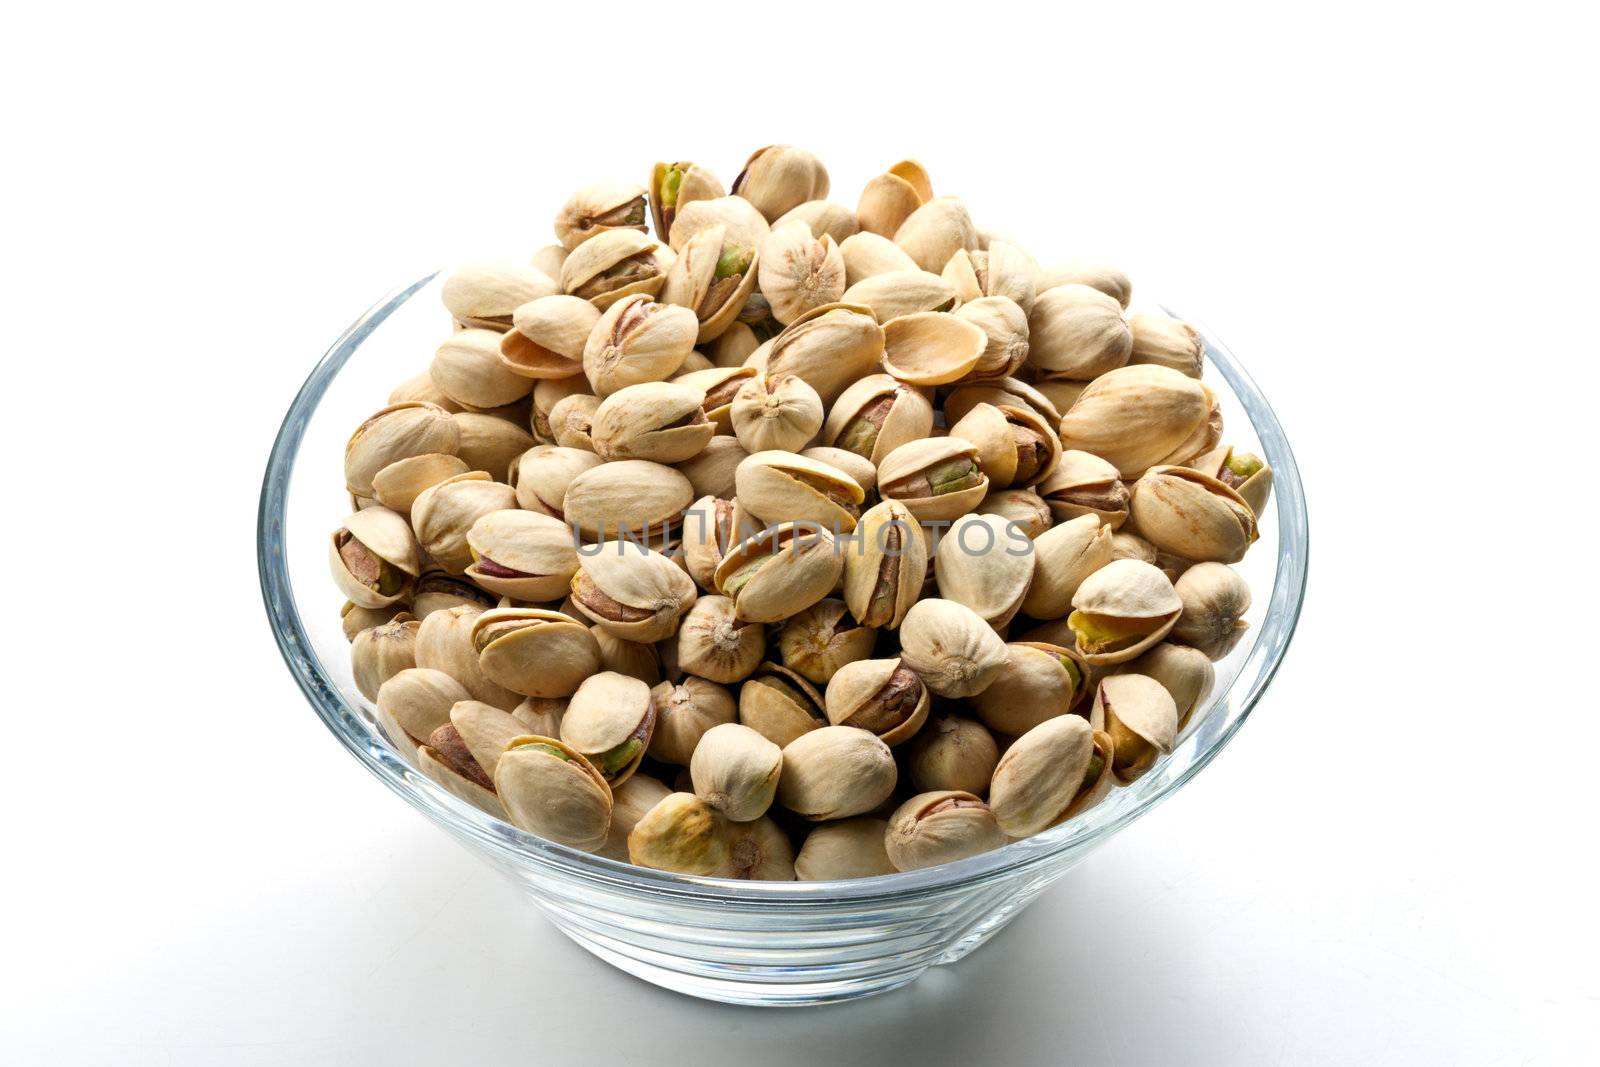 Pistachios nuts in glass bowl with white background